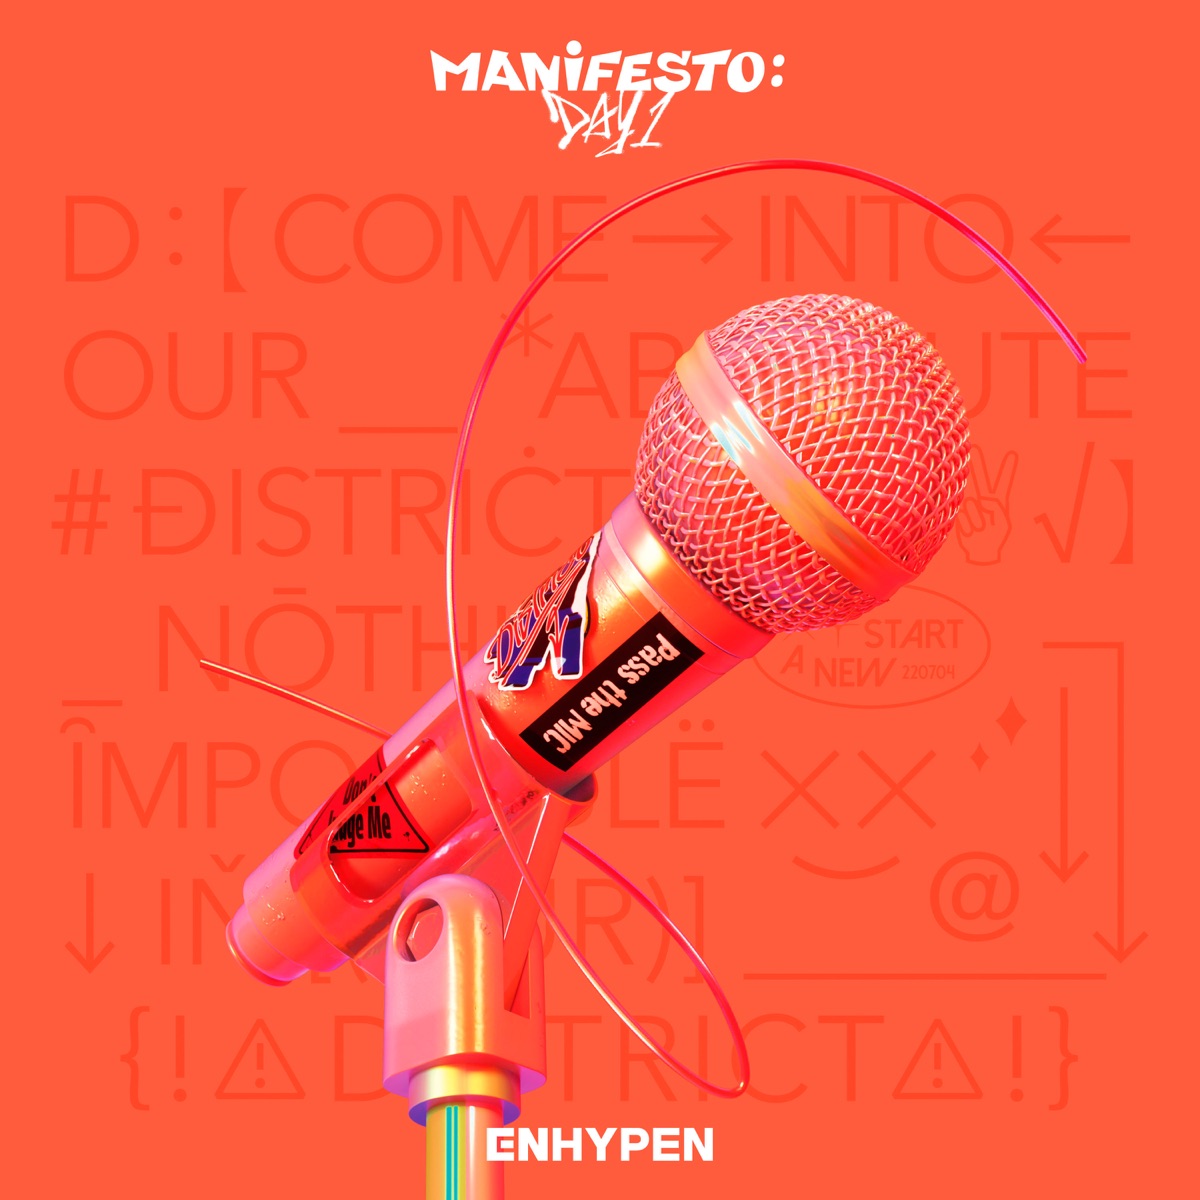 Cover art for『ENHYPEN - Future Perfect (Pass the MIC)』from the release『MANIFESTO : DAY 1』